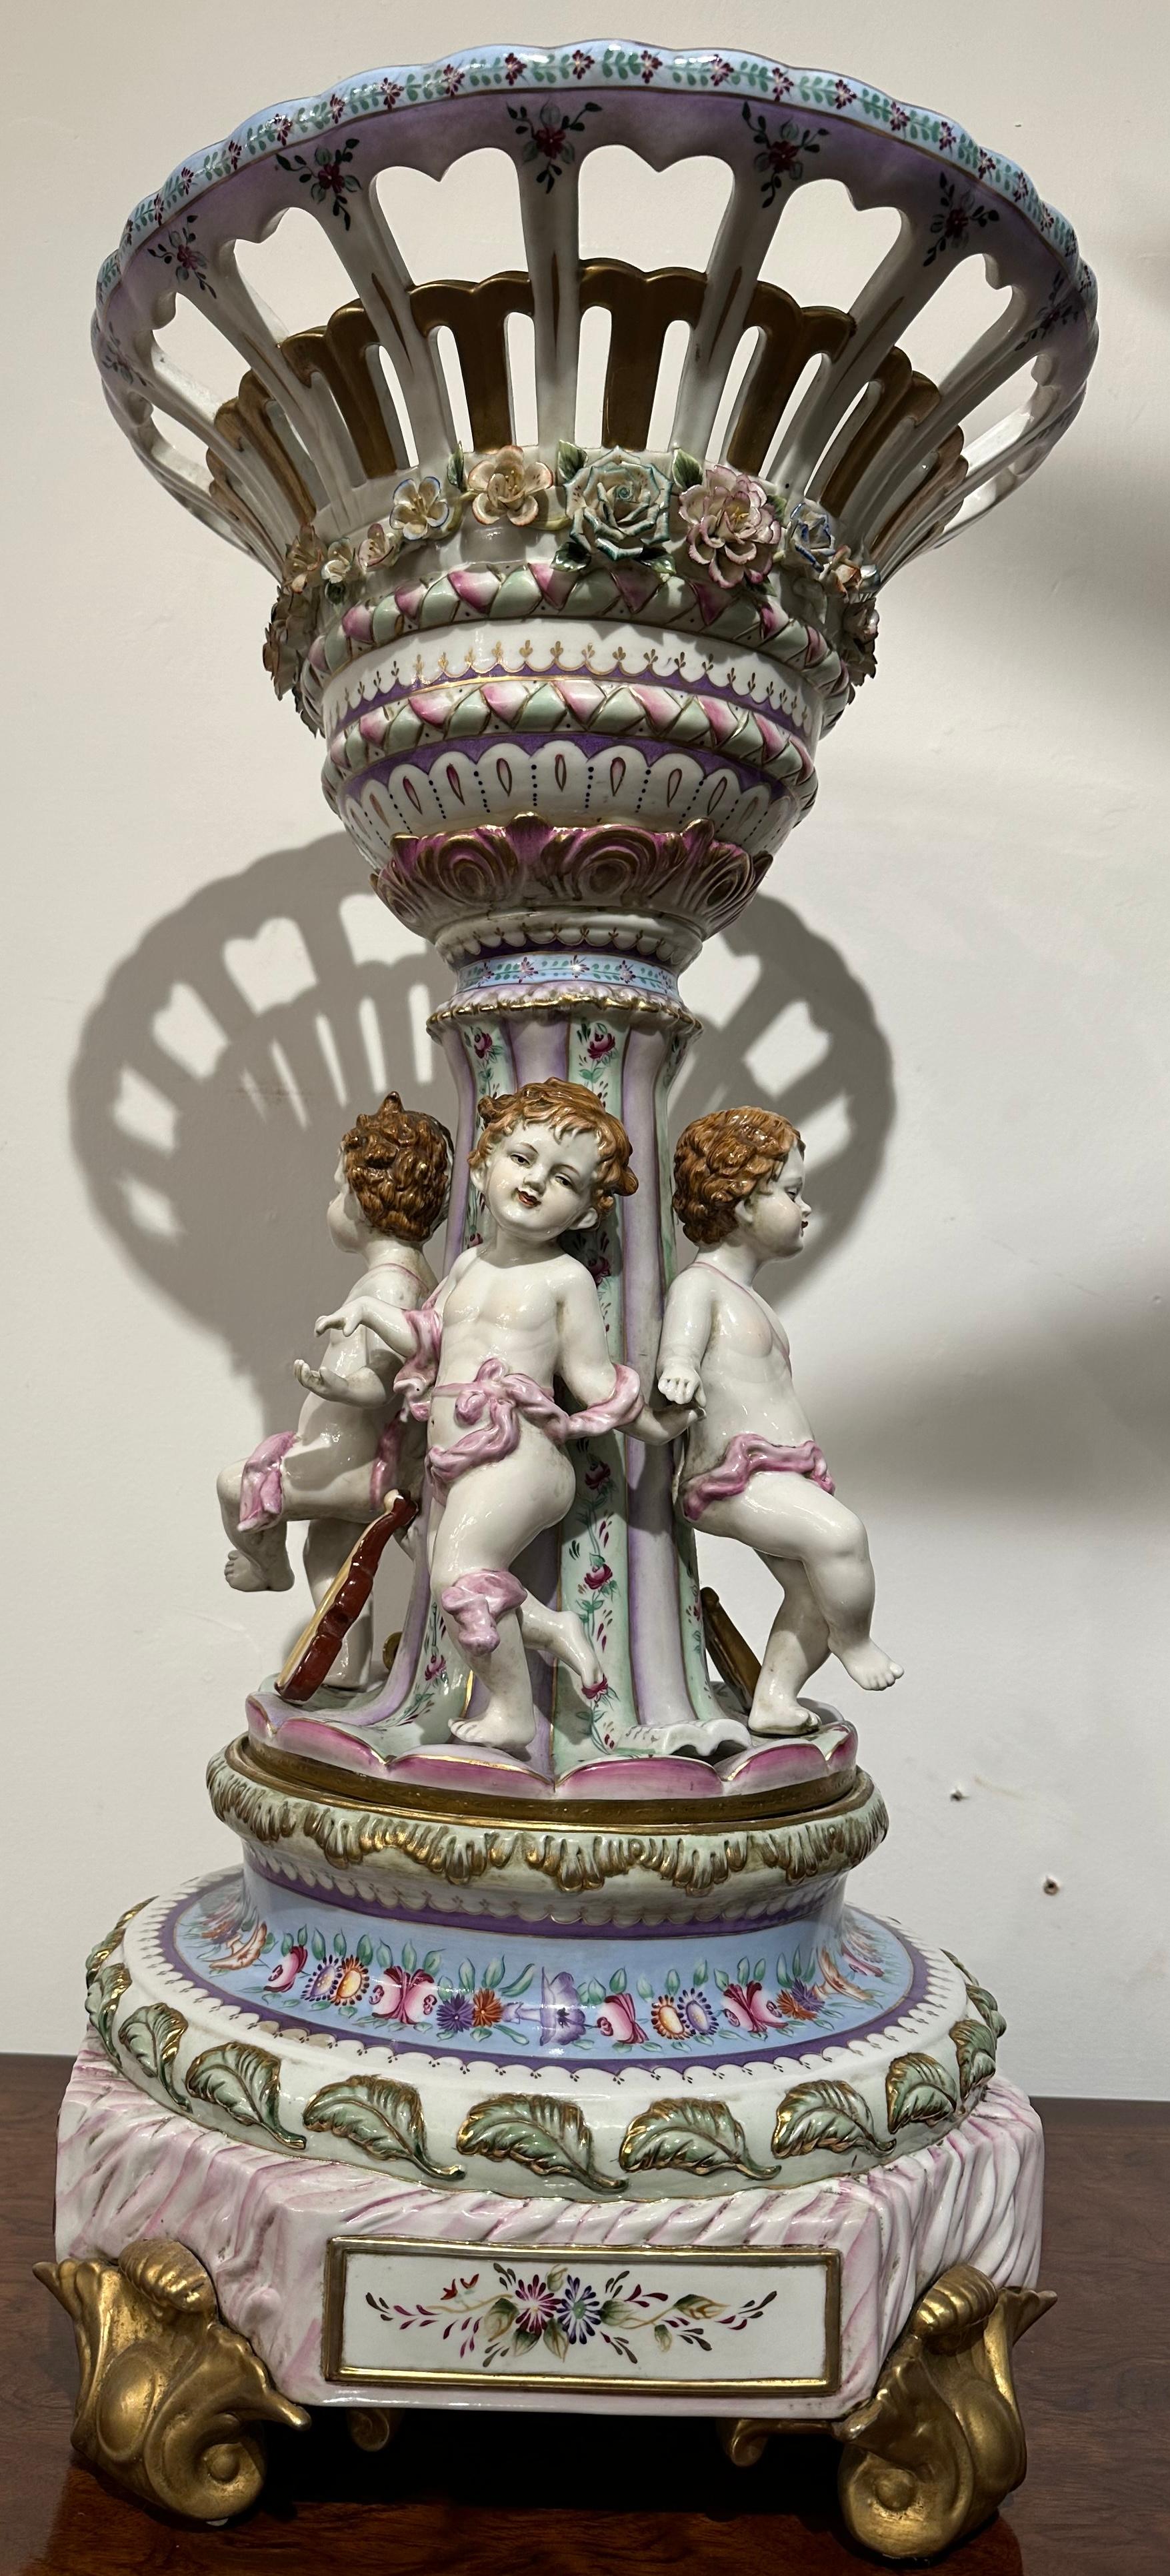 An extremely decorative and carefully crafted Sevres Style porcelain Centrepiece. A delicate pierced basket wreathed in roses sits atop a column encircled by cupids on a intricately painted tiered base. A highly decorative design that is brightly